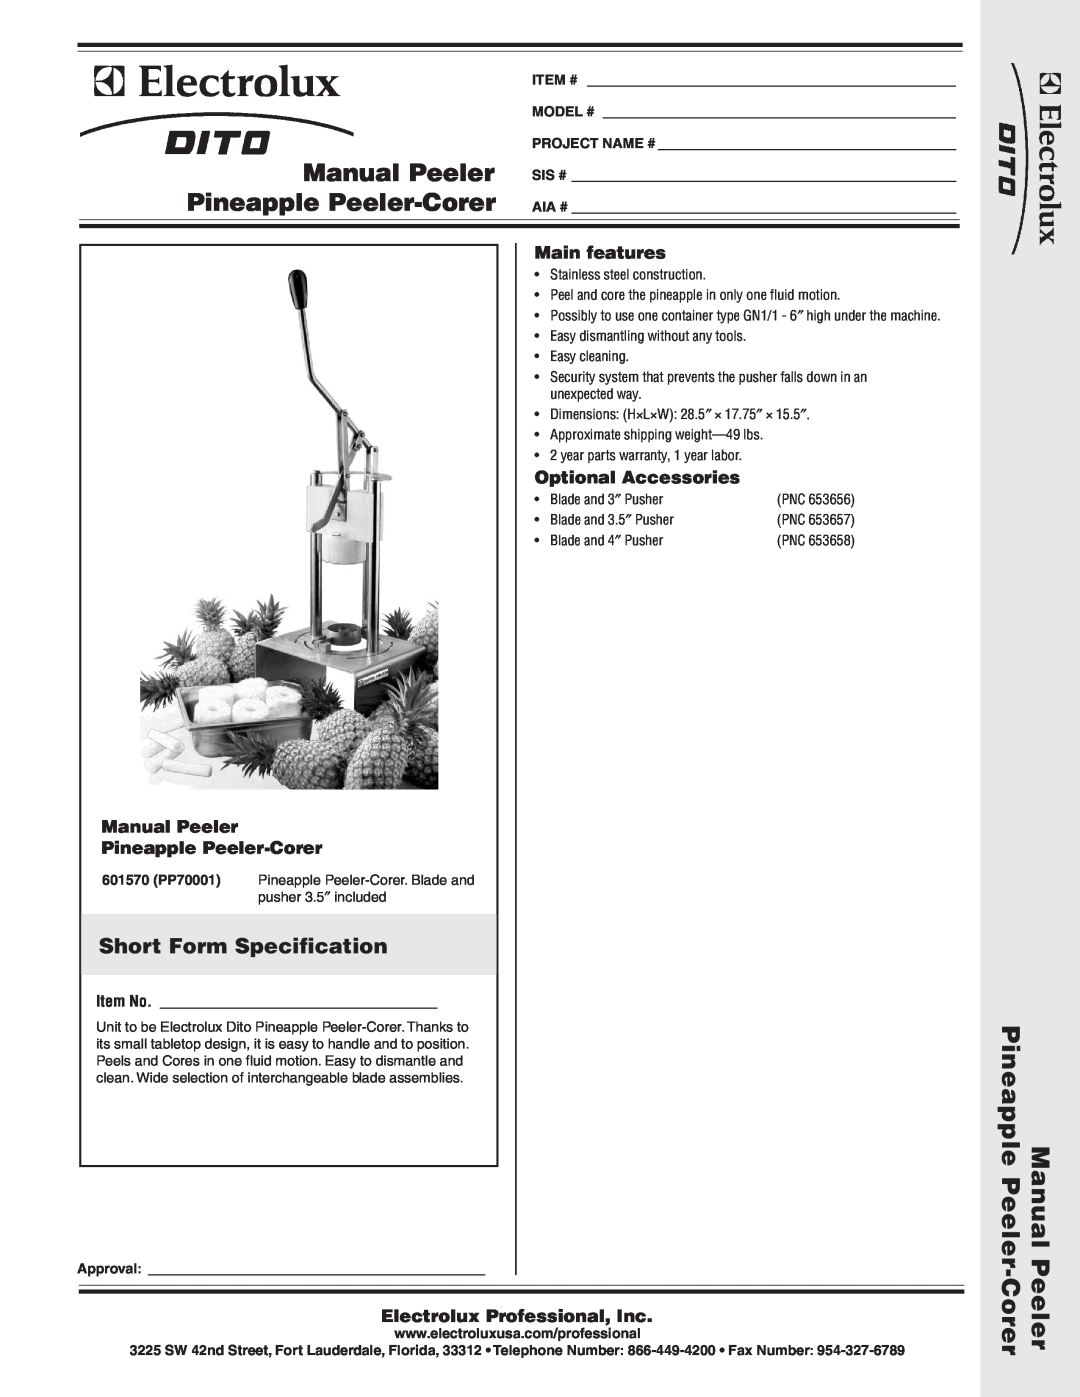 Electrolux 601570 dimensions Short Form Specification, Item No, Pineapple Peeler-Corer, Manual Peeler, Main features 